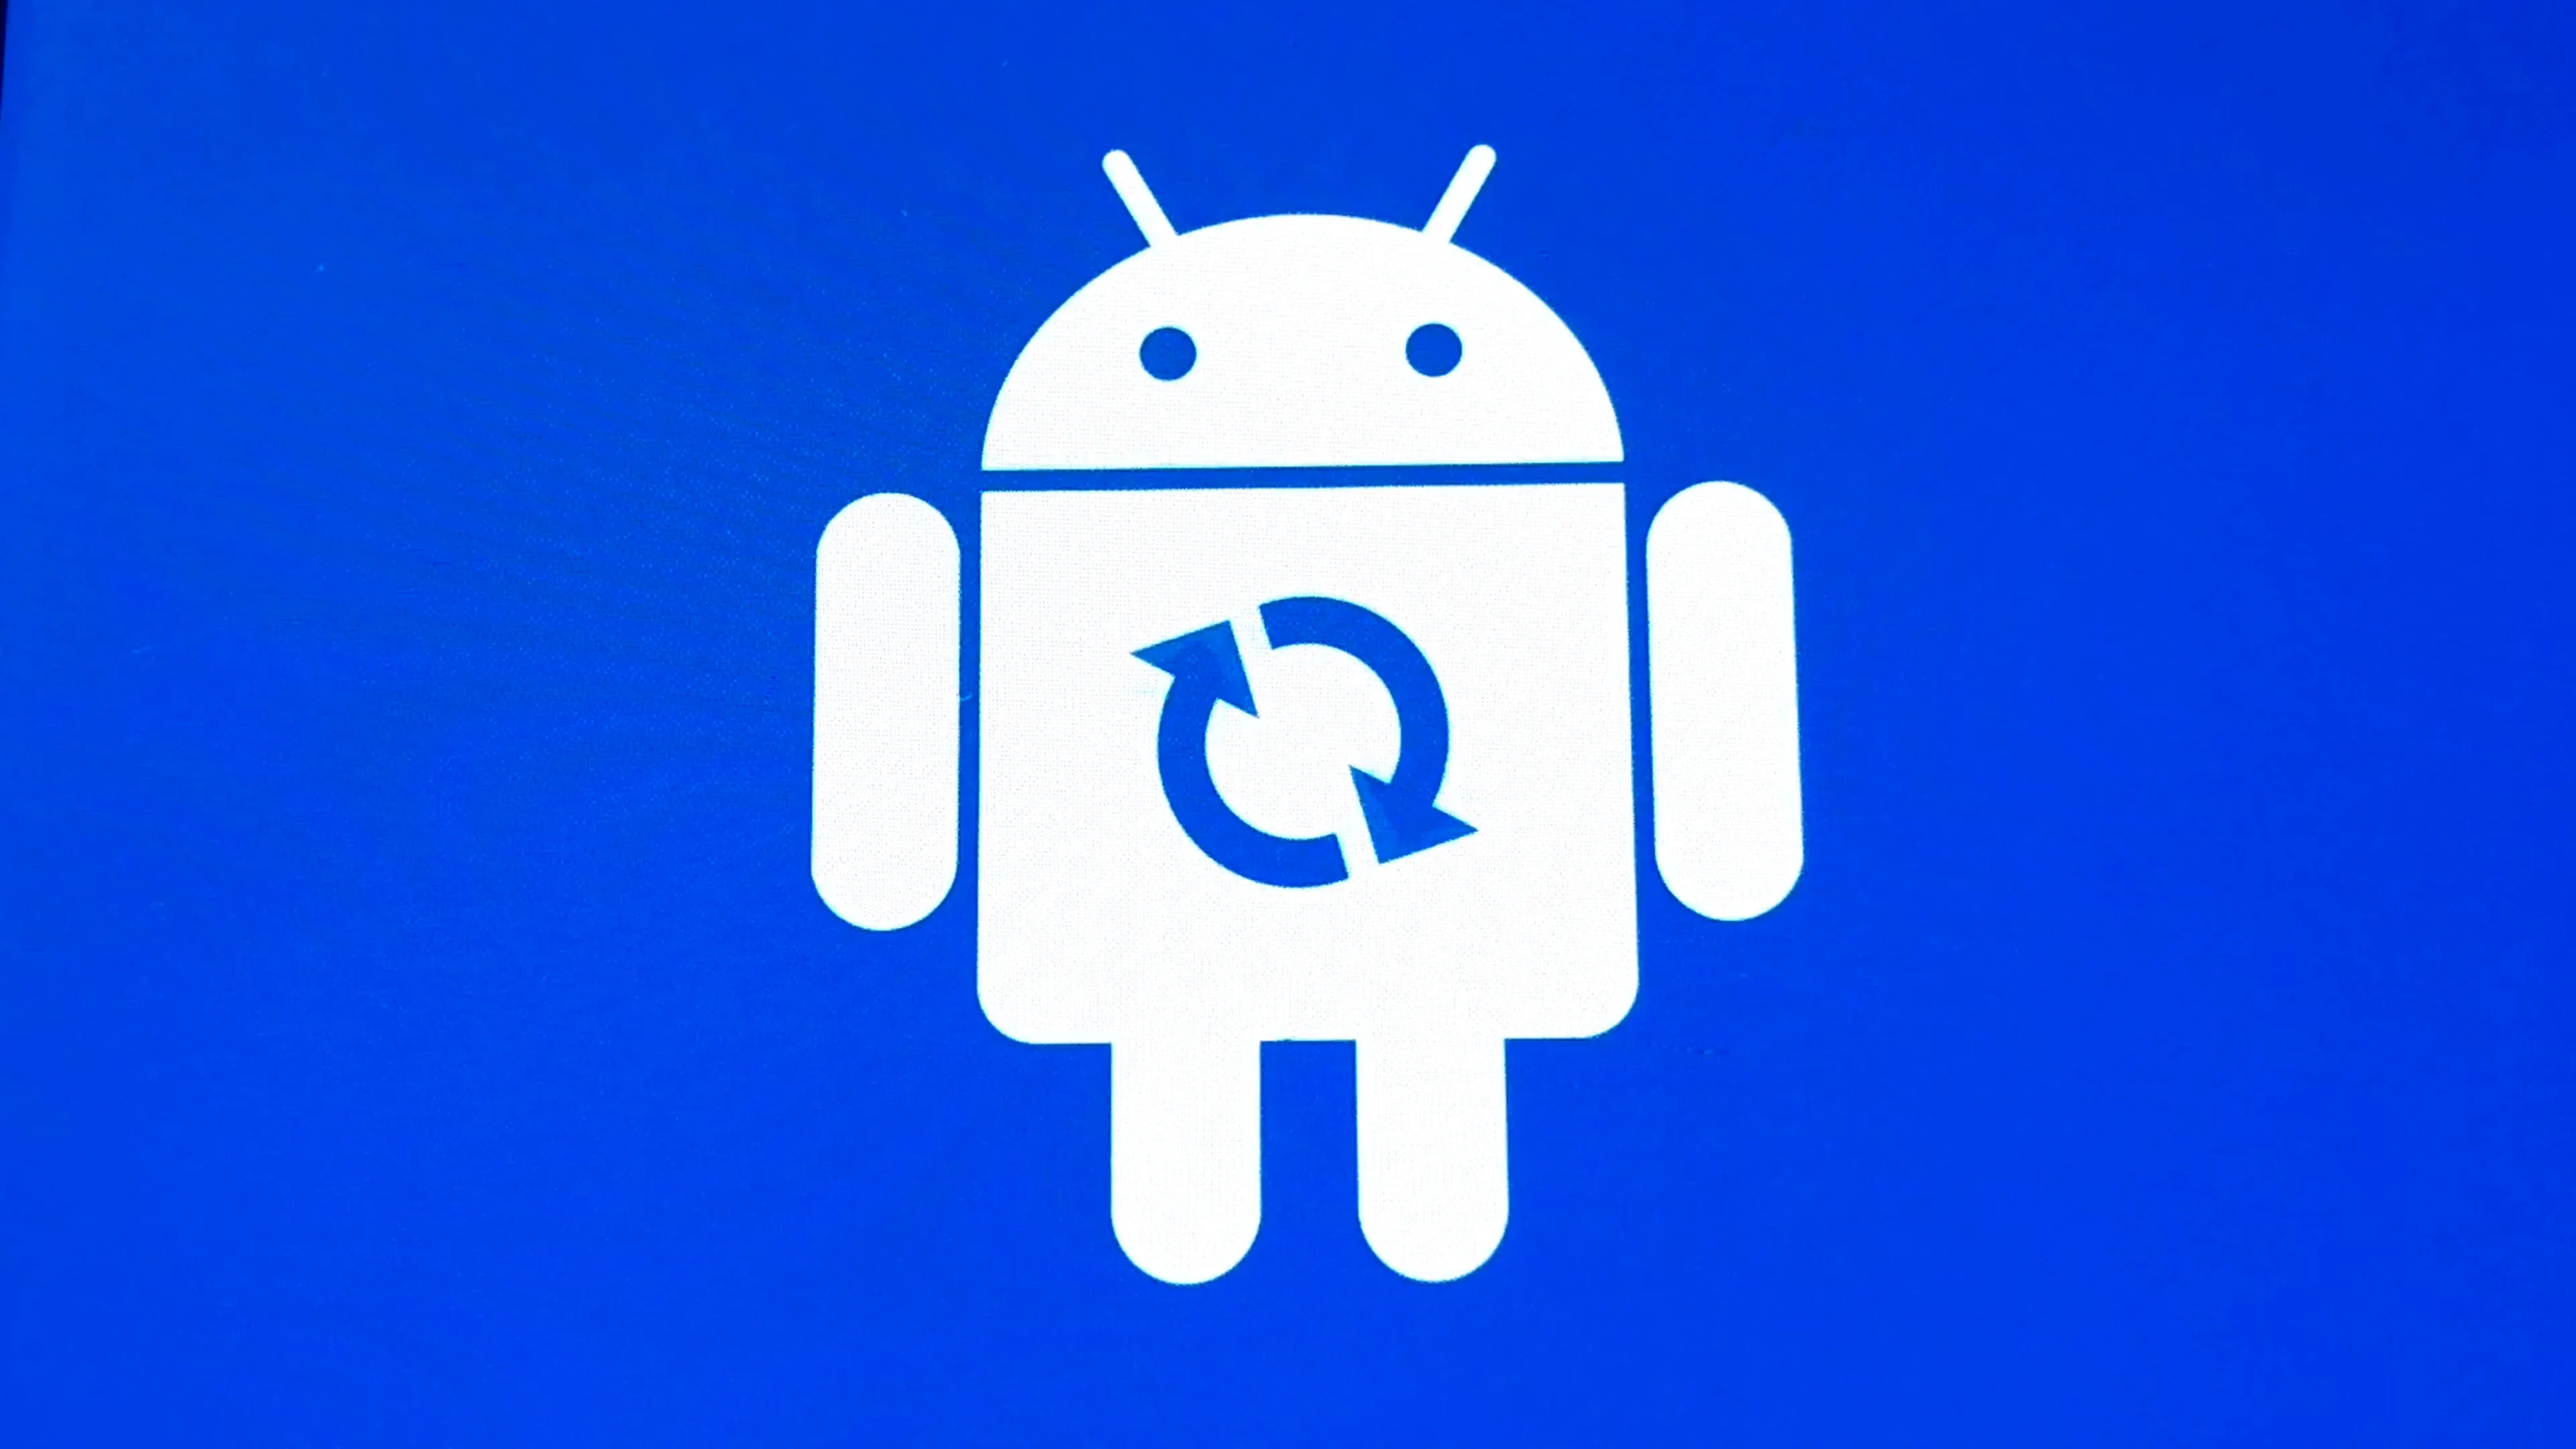 android icon blue